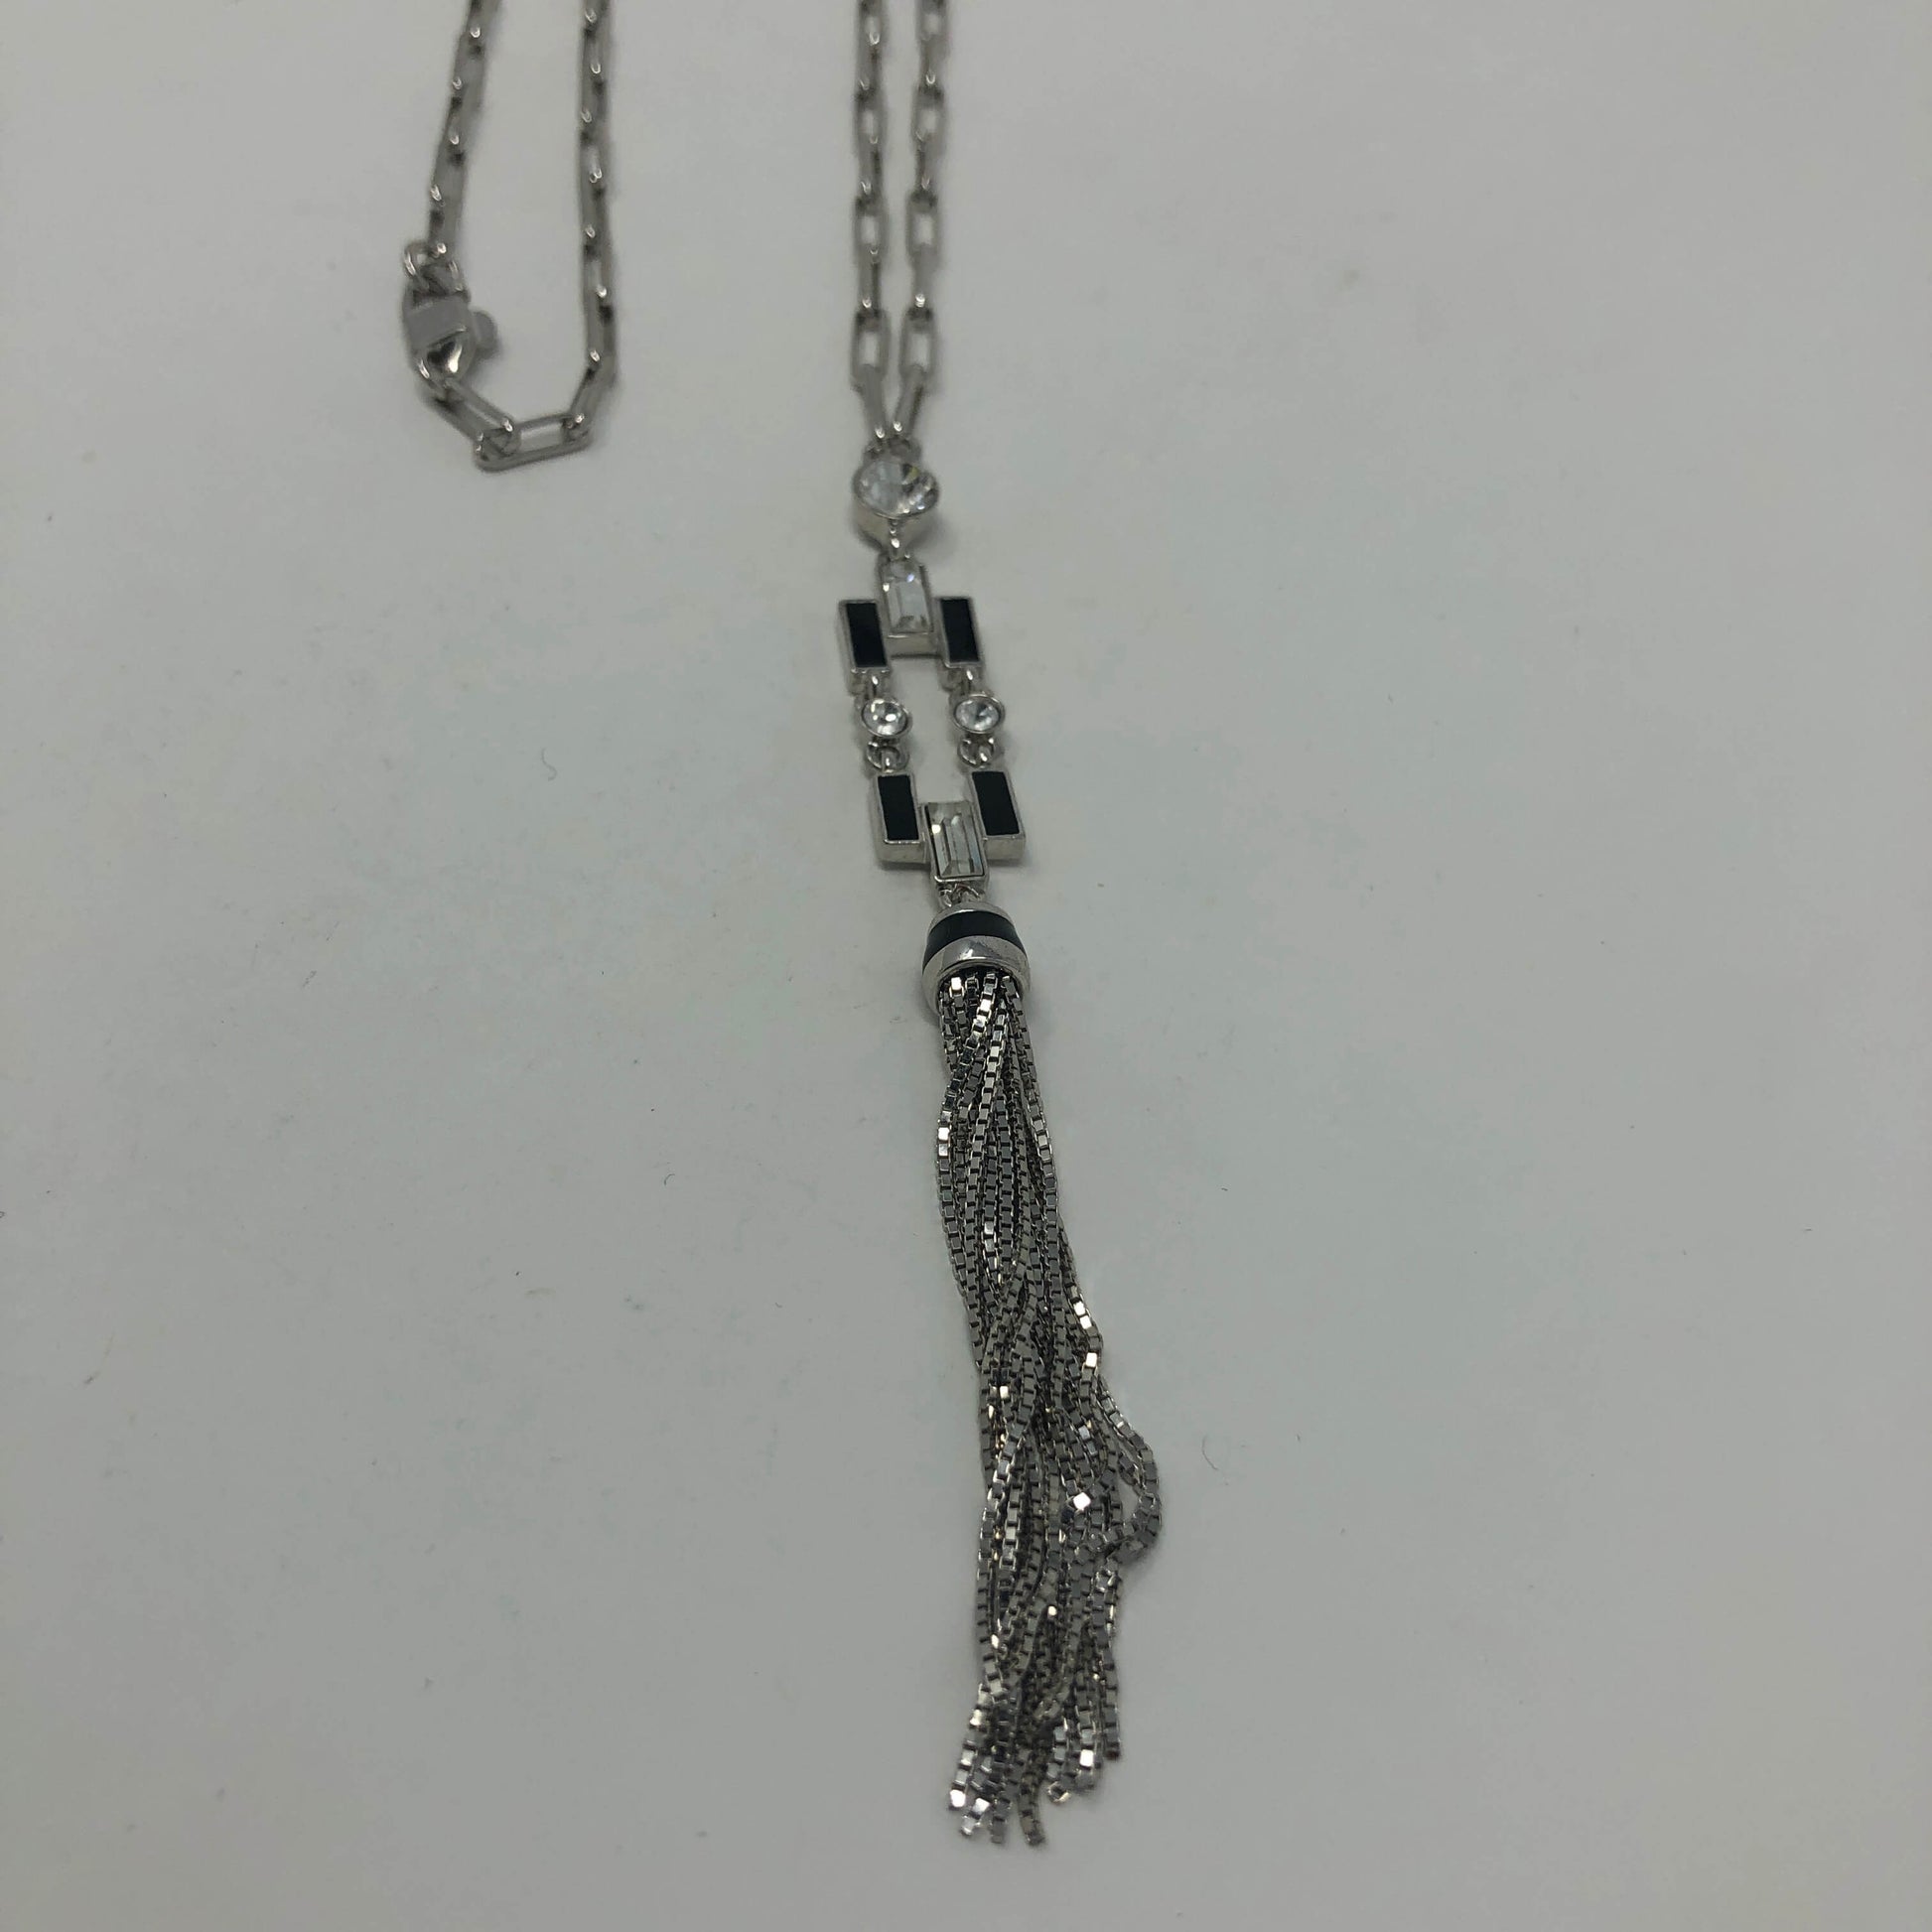 Tassled Silver Necklace - Rofial Beauty